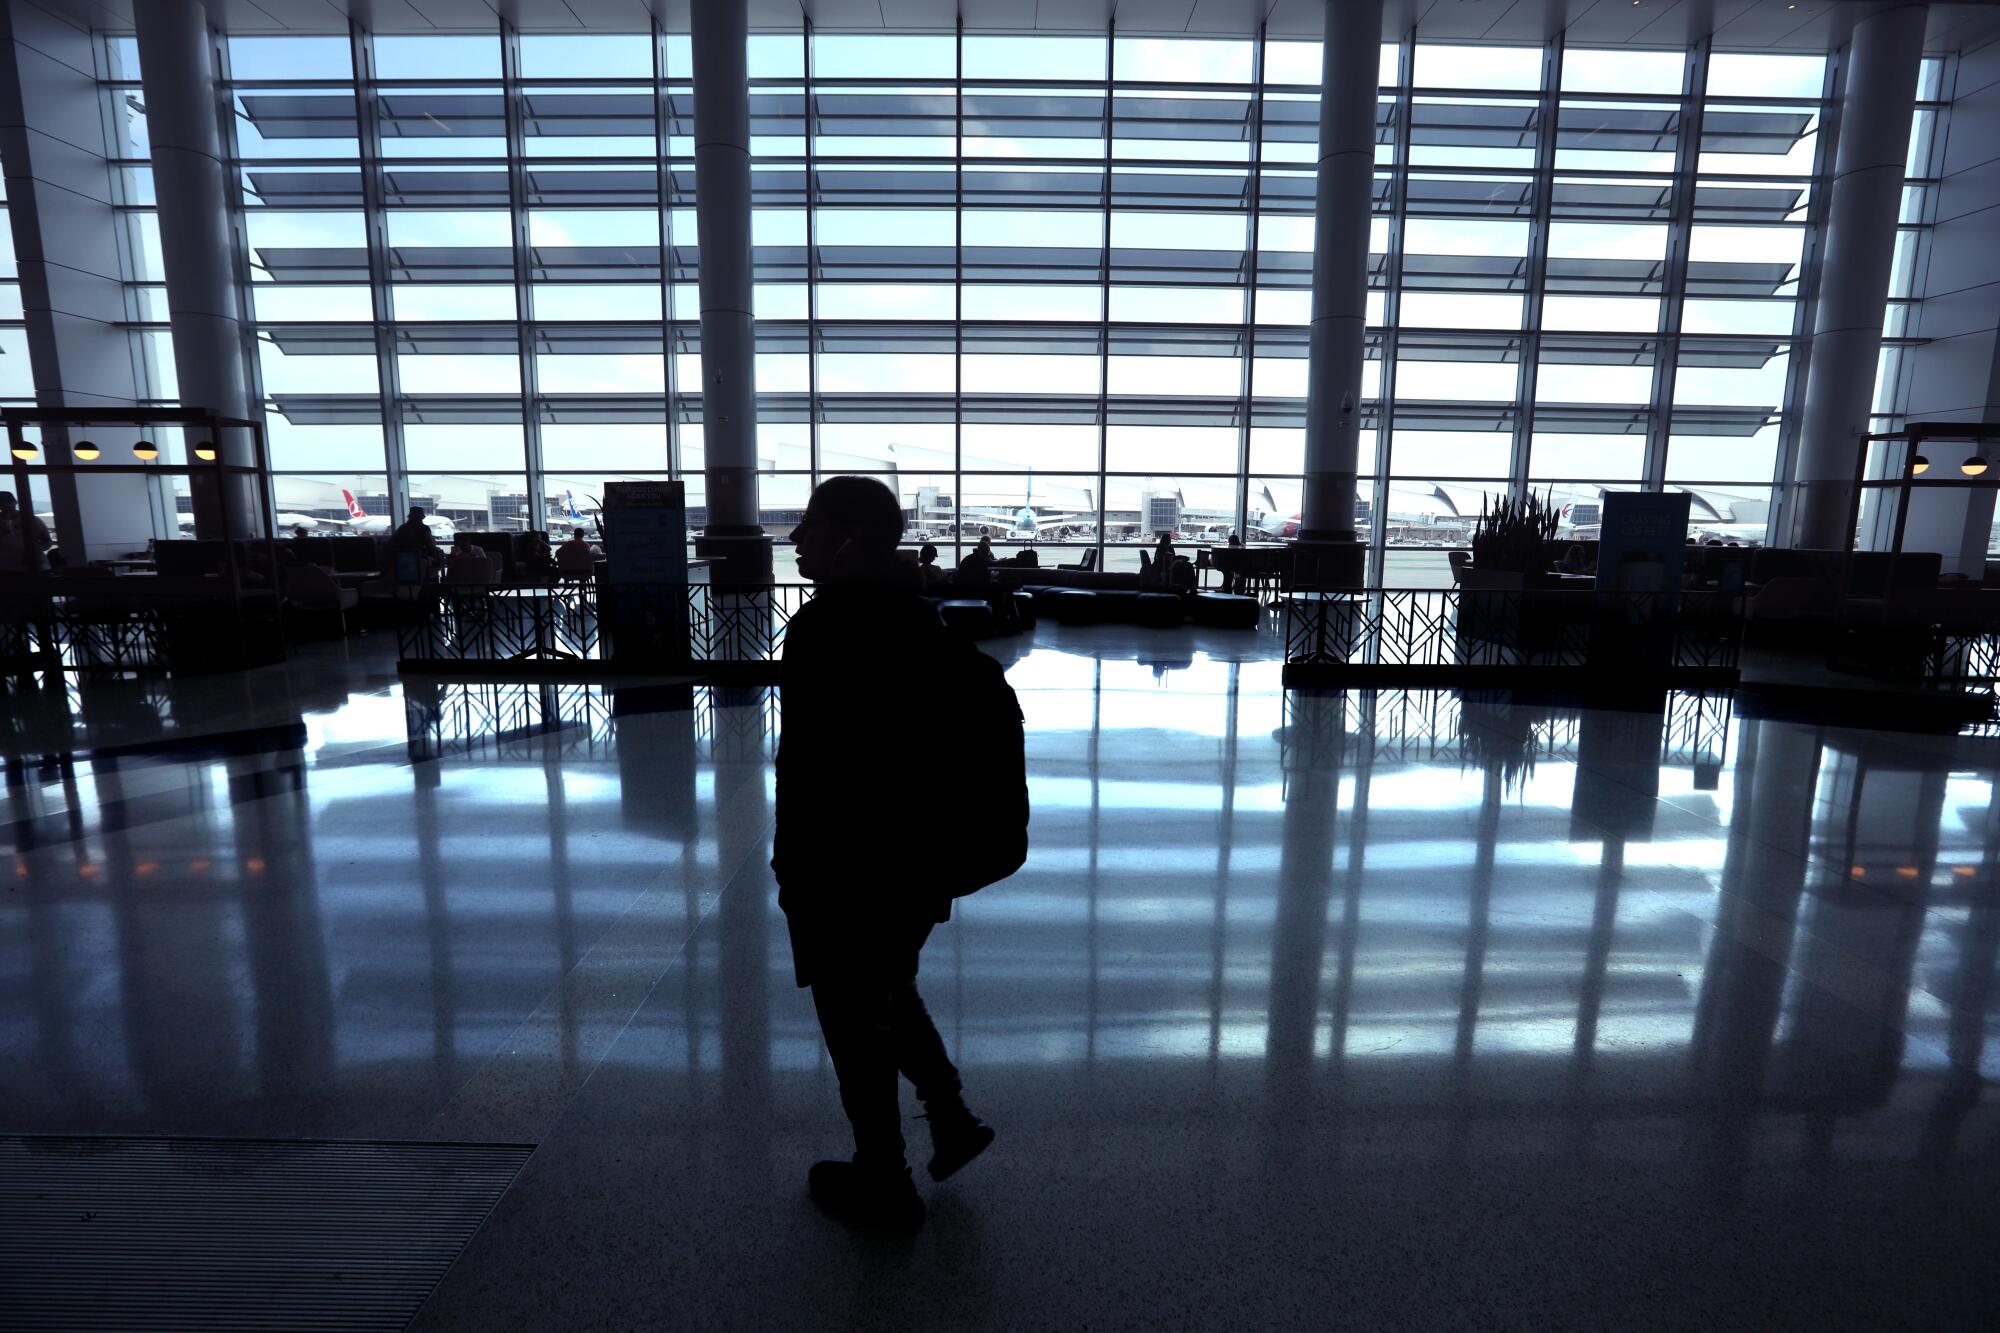 A traveler makes his way through the West Gates area of the post-security area of the Tom Bradley Terminal at LAX.